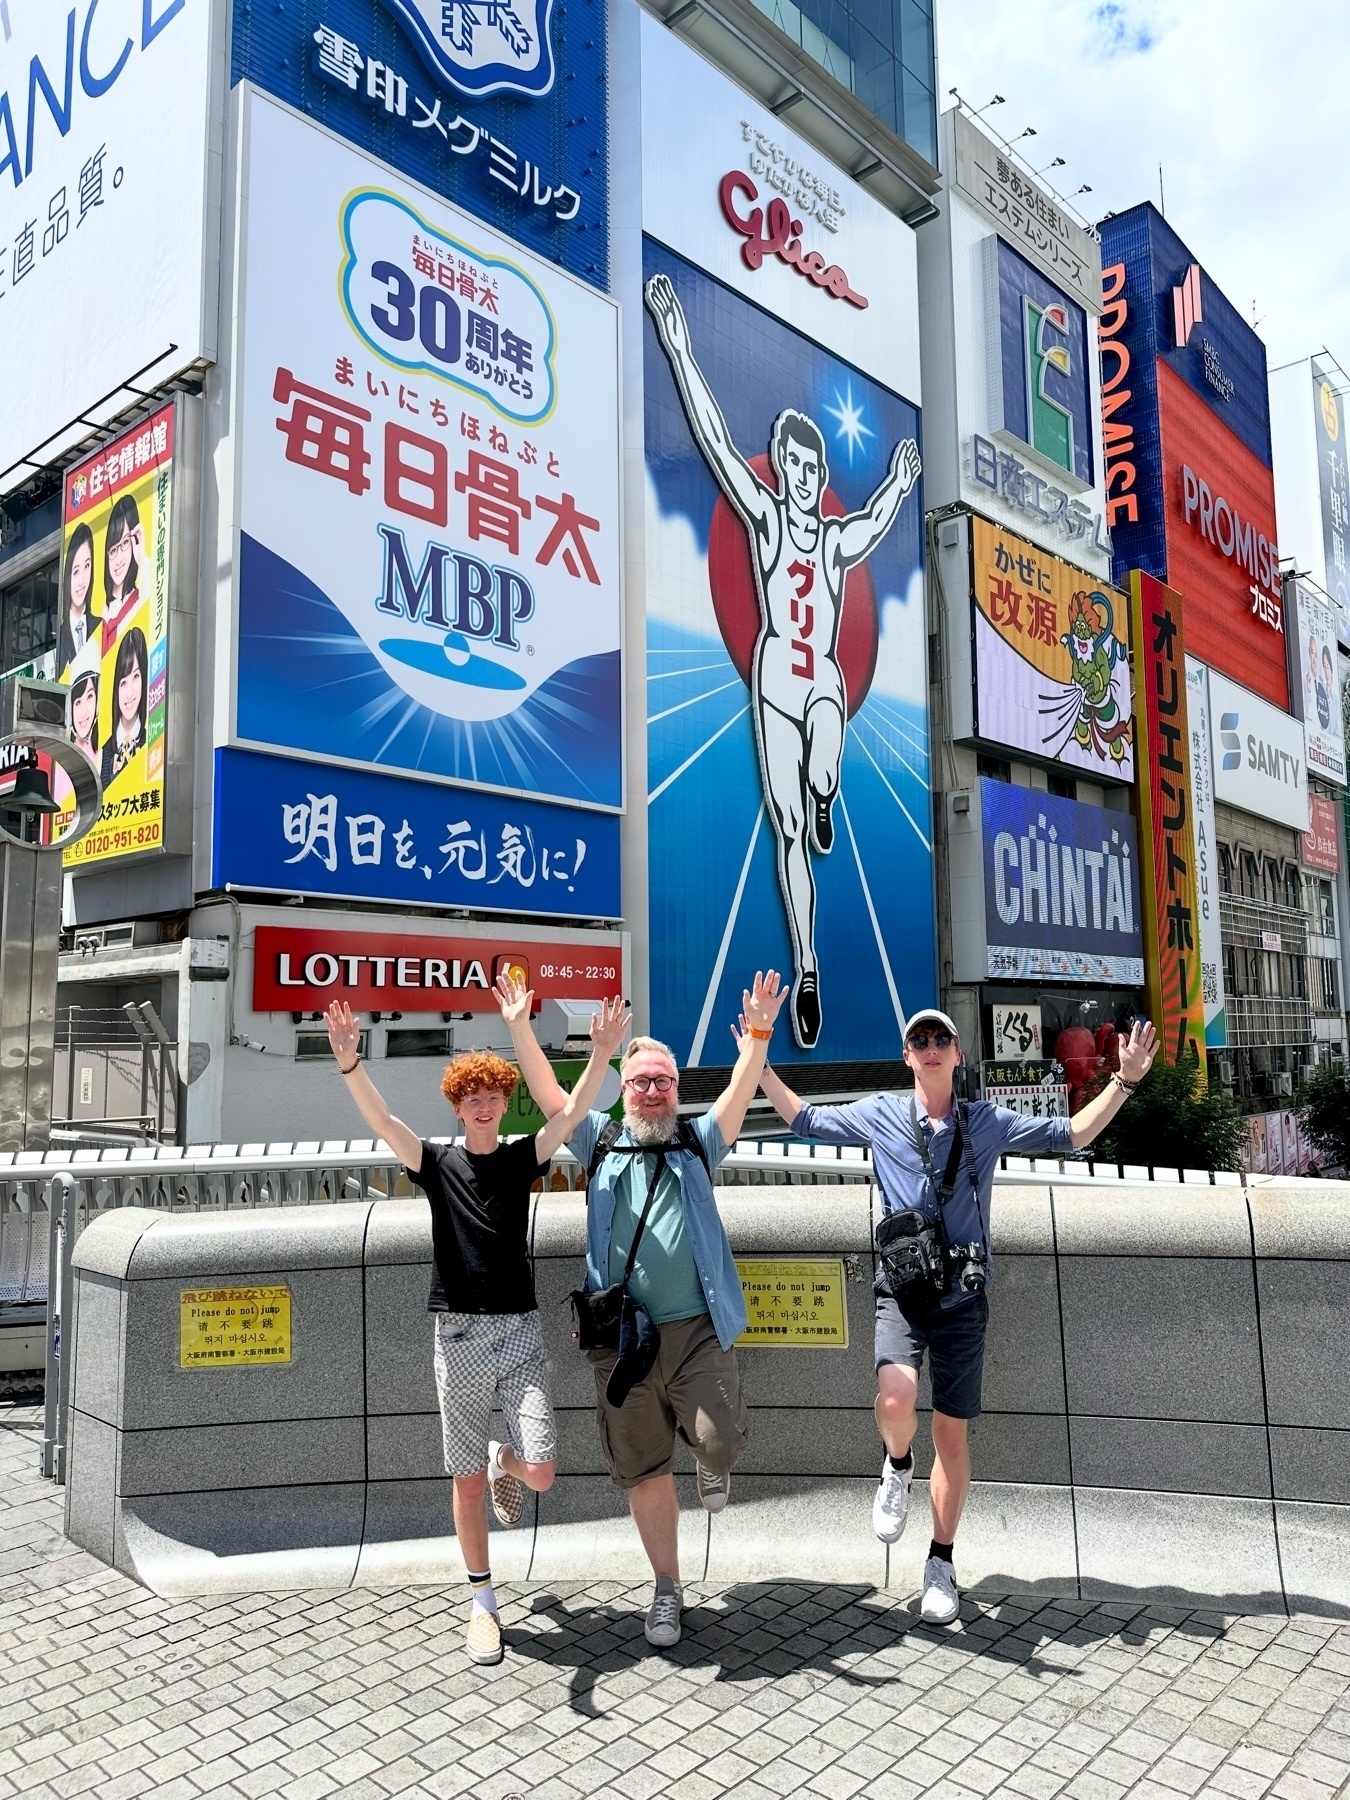 Me and my sons joyfully posing with raised arms in front of the famous Glico Running Man sign in the Dotonbori district of Osaka, Japan, with various colorful billboards in the background.